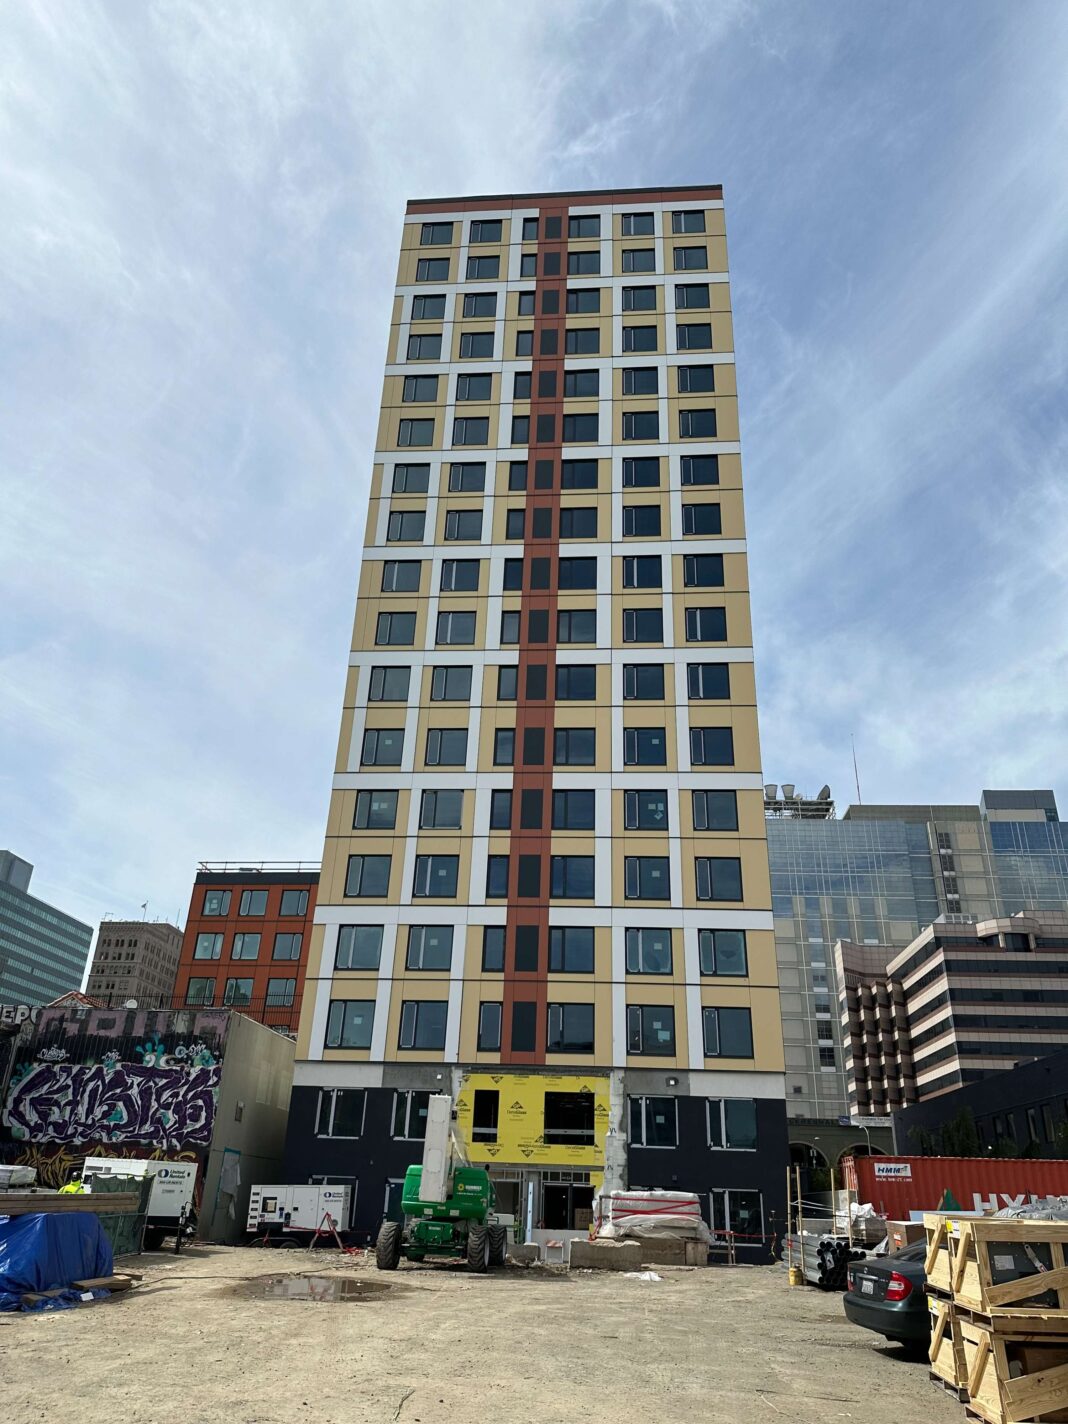 Introducing 1510 Webster Street, in downtown Oakland, which is revolutionising mid-rise and high-rise construction in the Bay Area. (Photo Credit: Andrew Dunn)